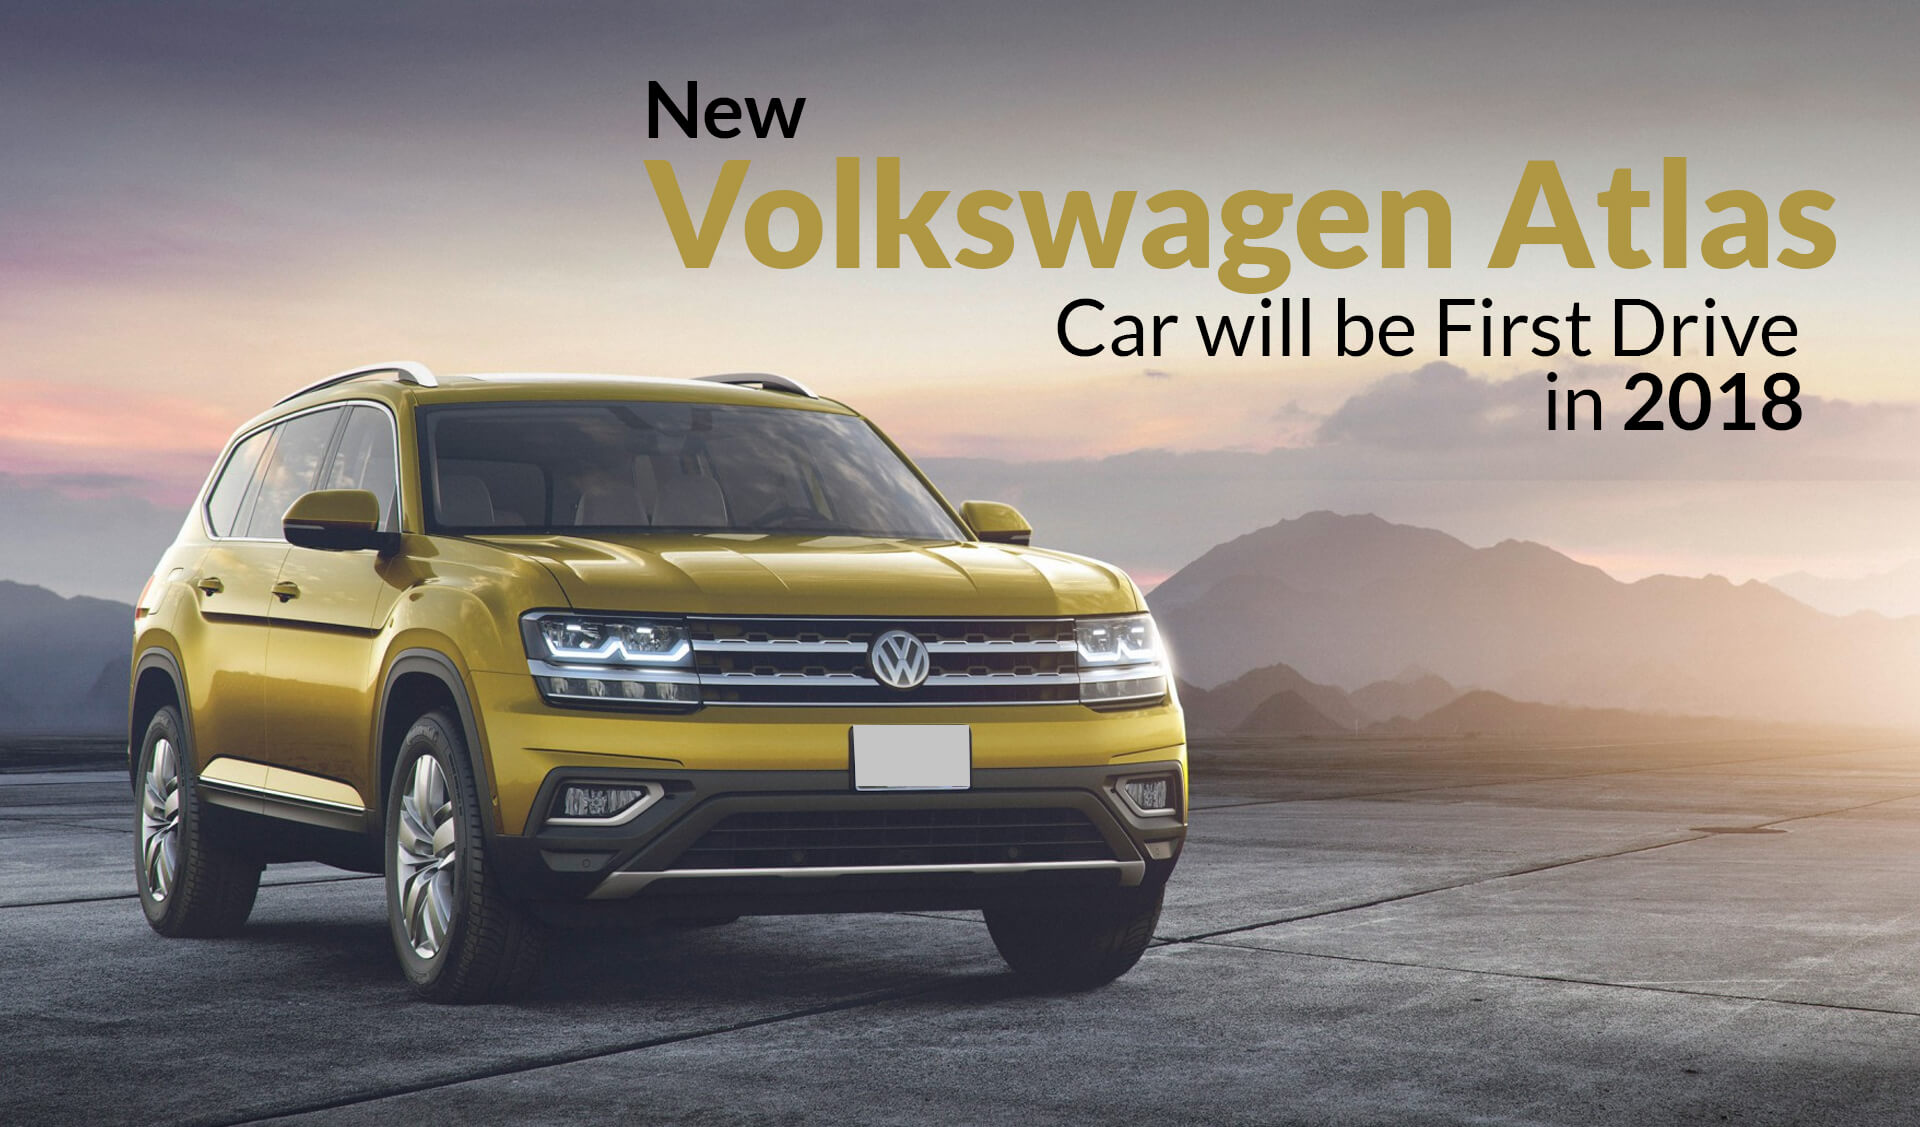 New Volkswagen Atlas Car will be First Drive in 2018